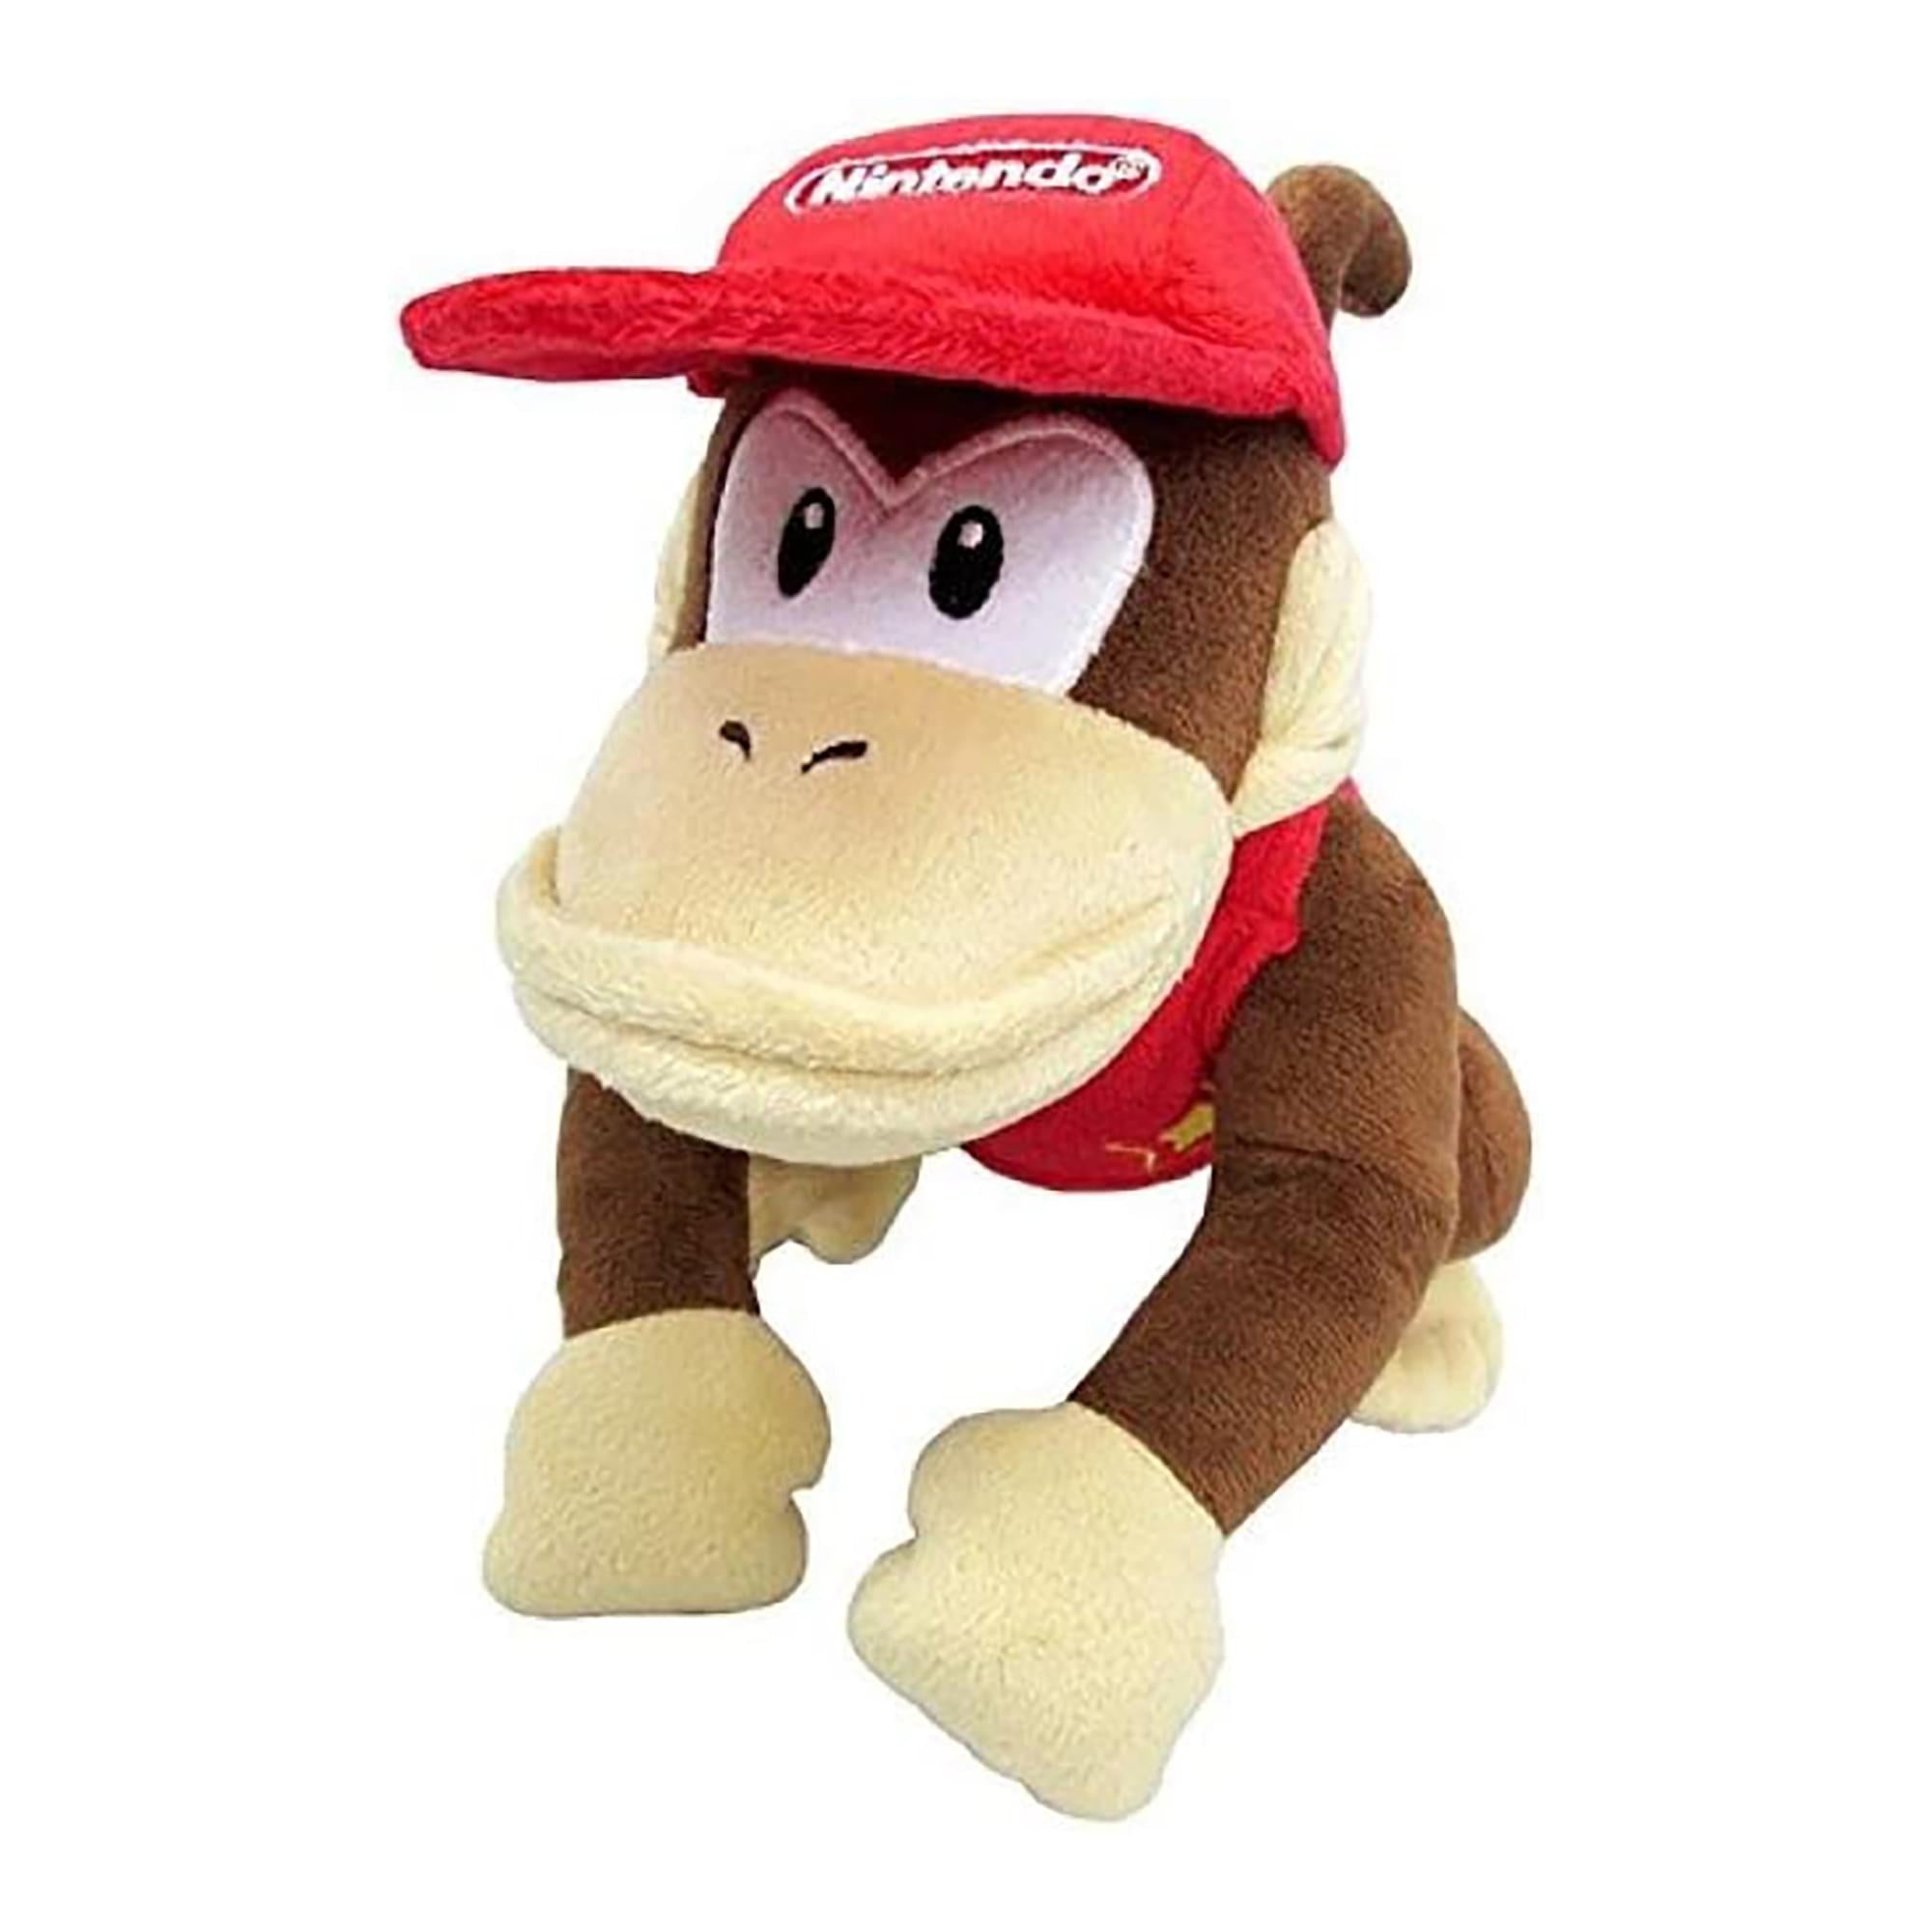 Super Mario All Star Collection 7 Inch Plush , Diddy Kong